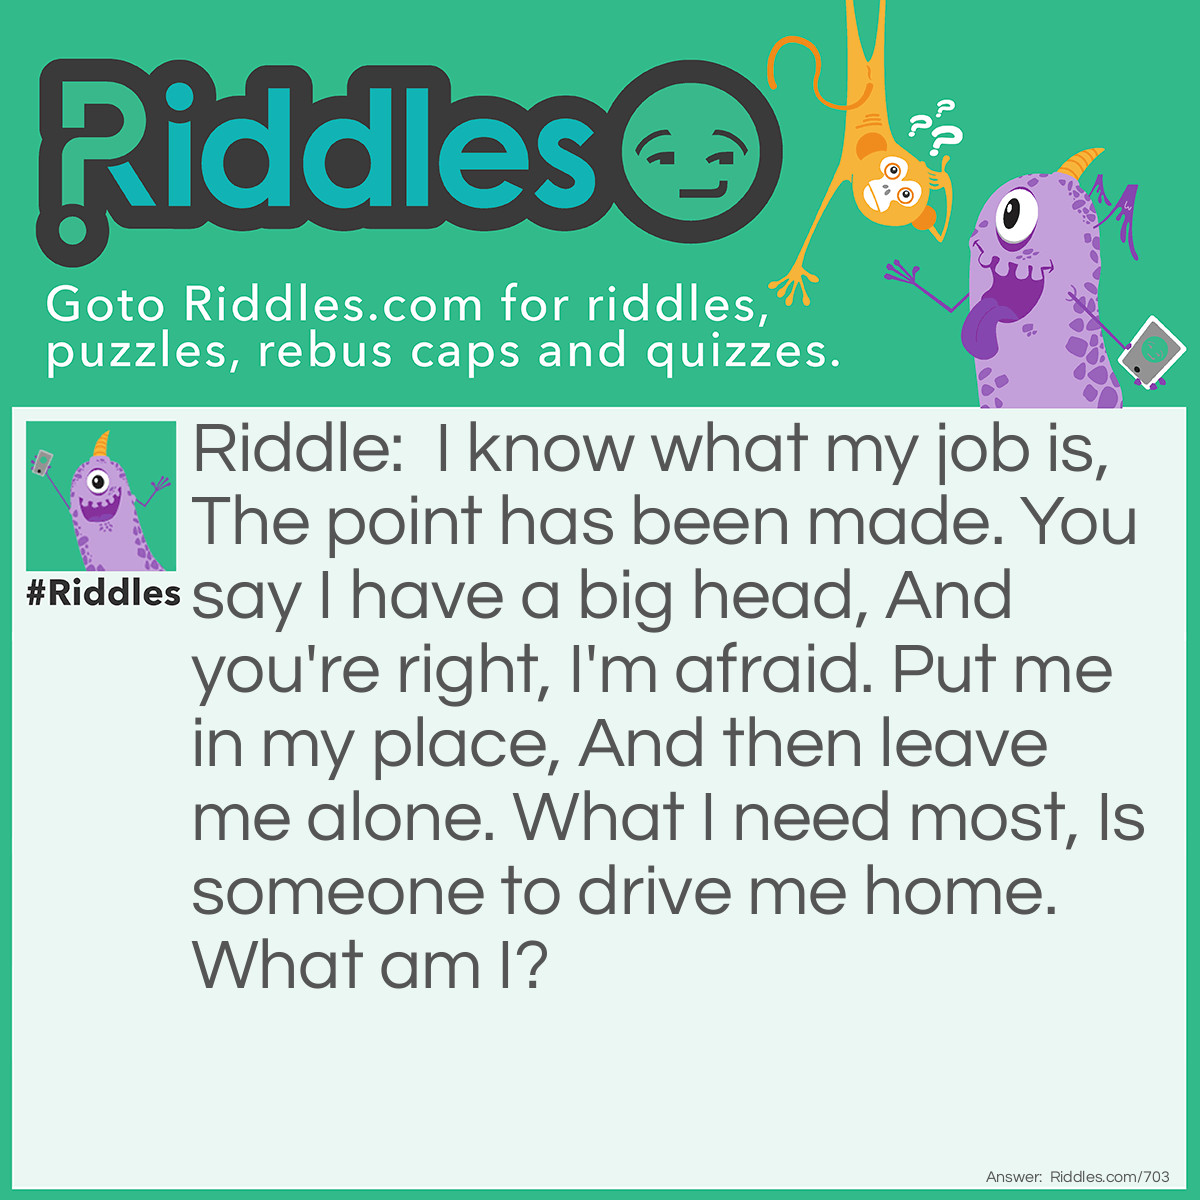 Riddle: I know what my job is, The point has been made. You say I have a big head, And you're right, I'm afraid. Put me in my place, And then leave me alone. What I need most, Is someone to drive me home. What am I? Answer: A Nail!